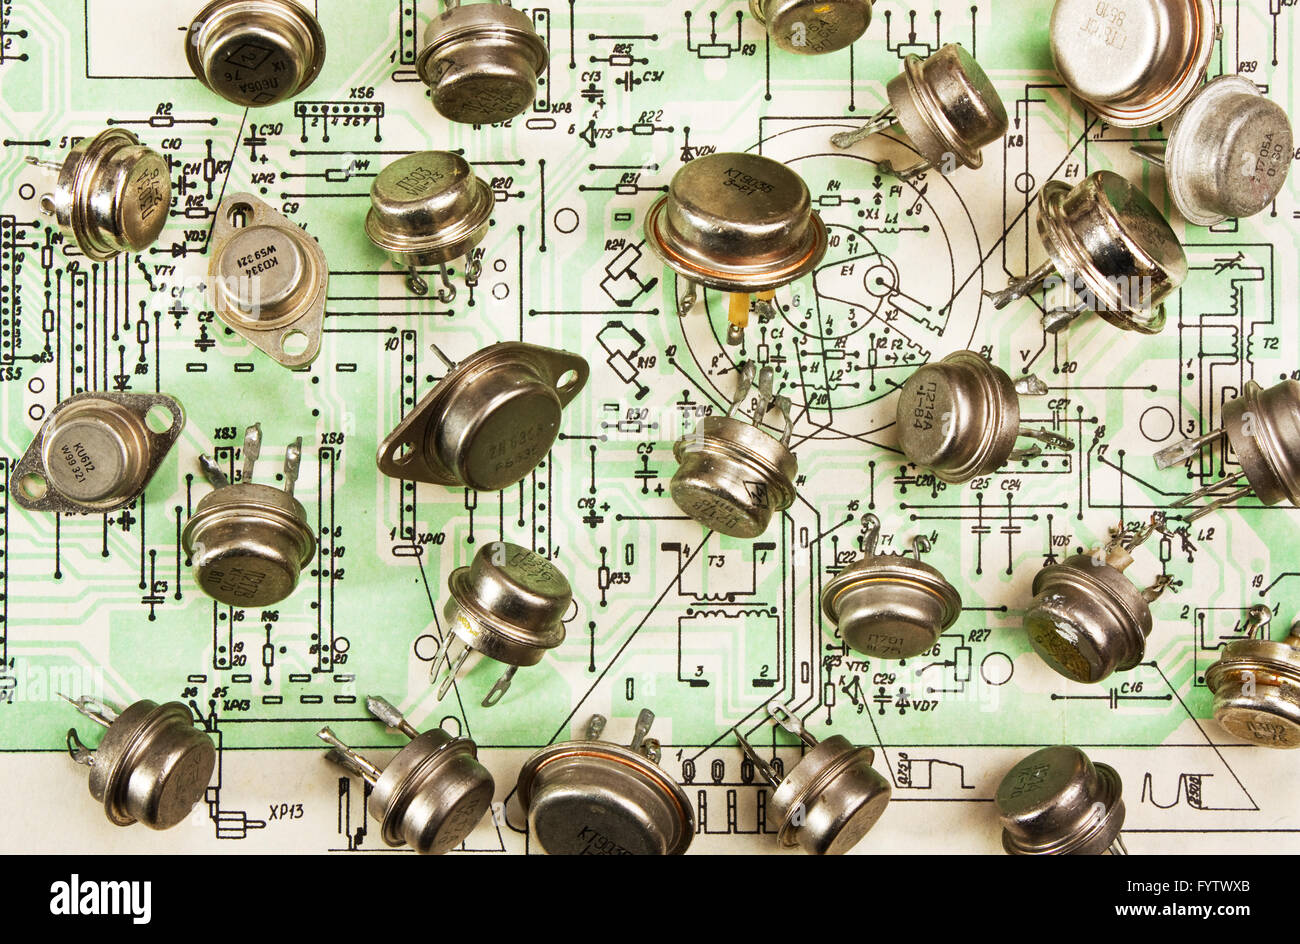 Old electronic components Stock Photo